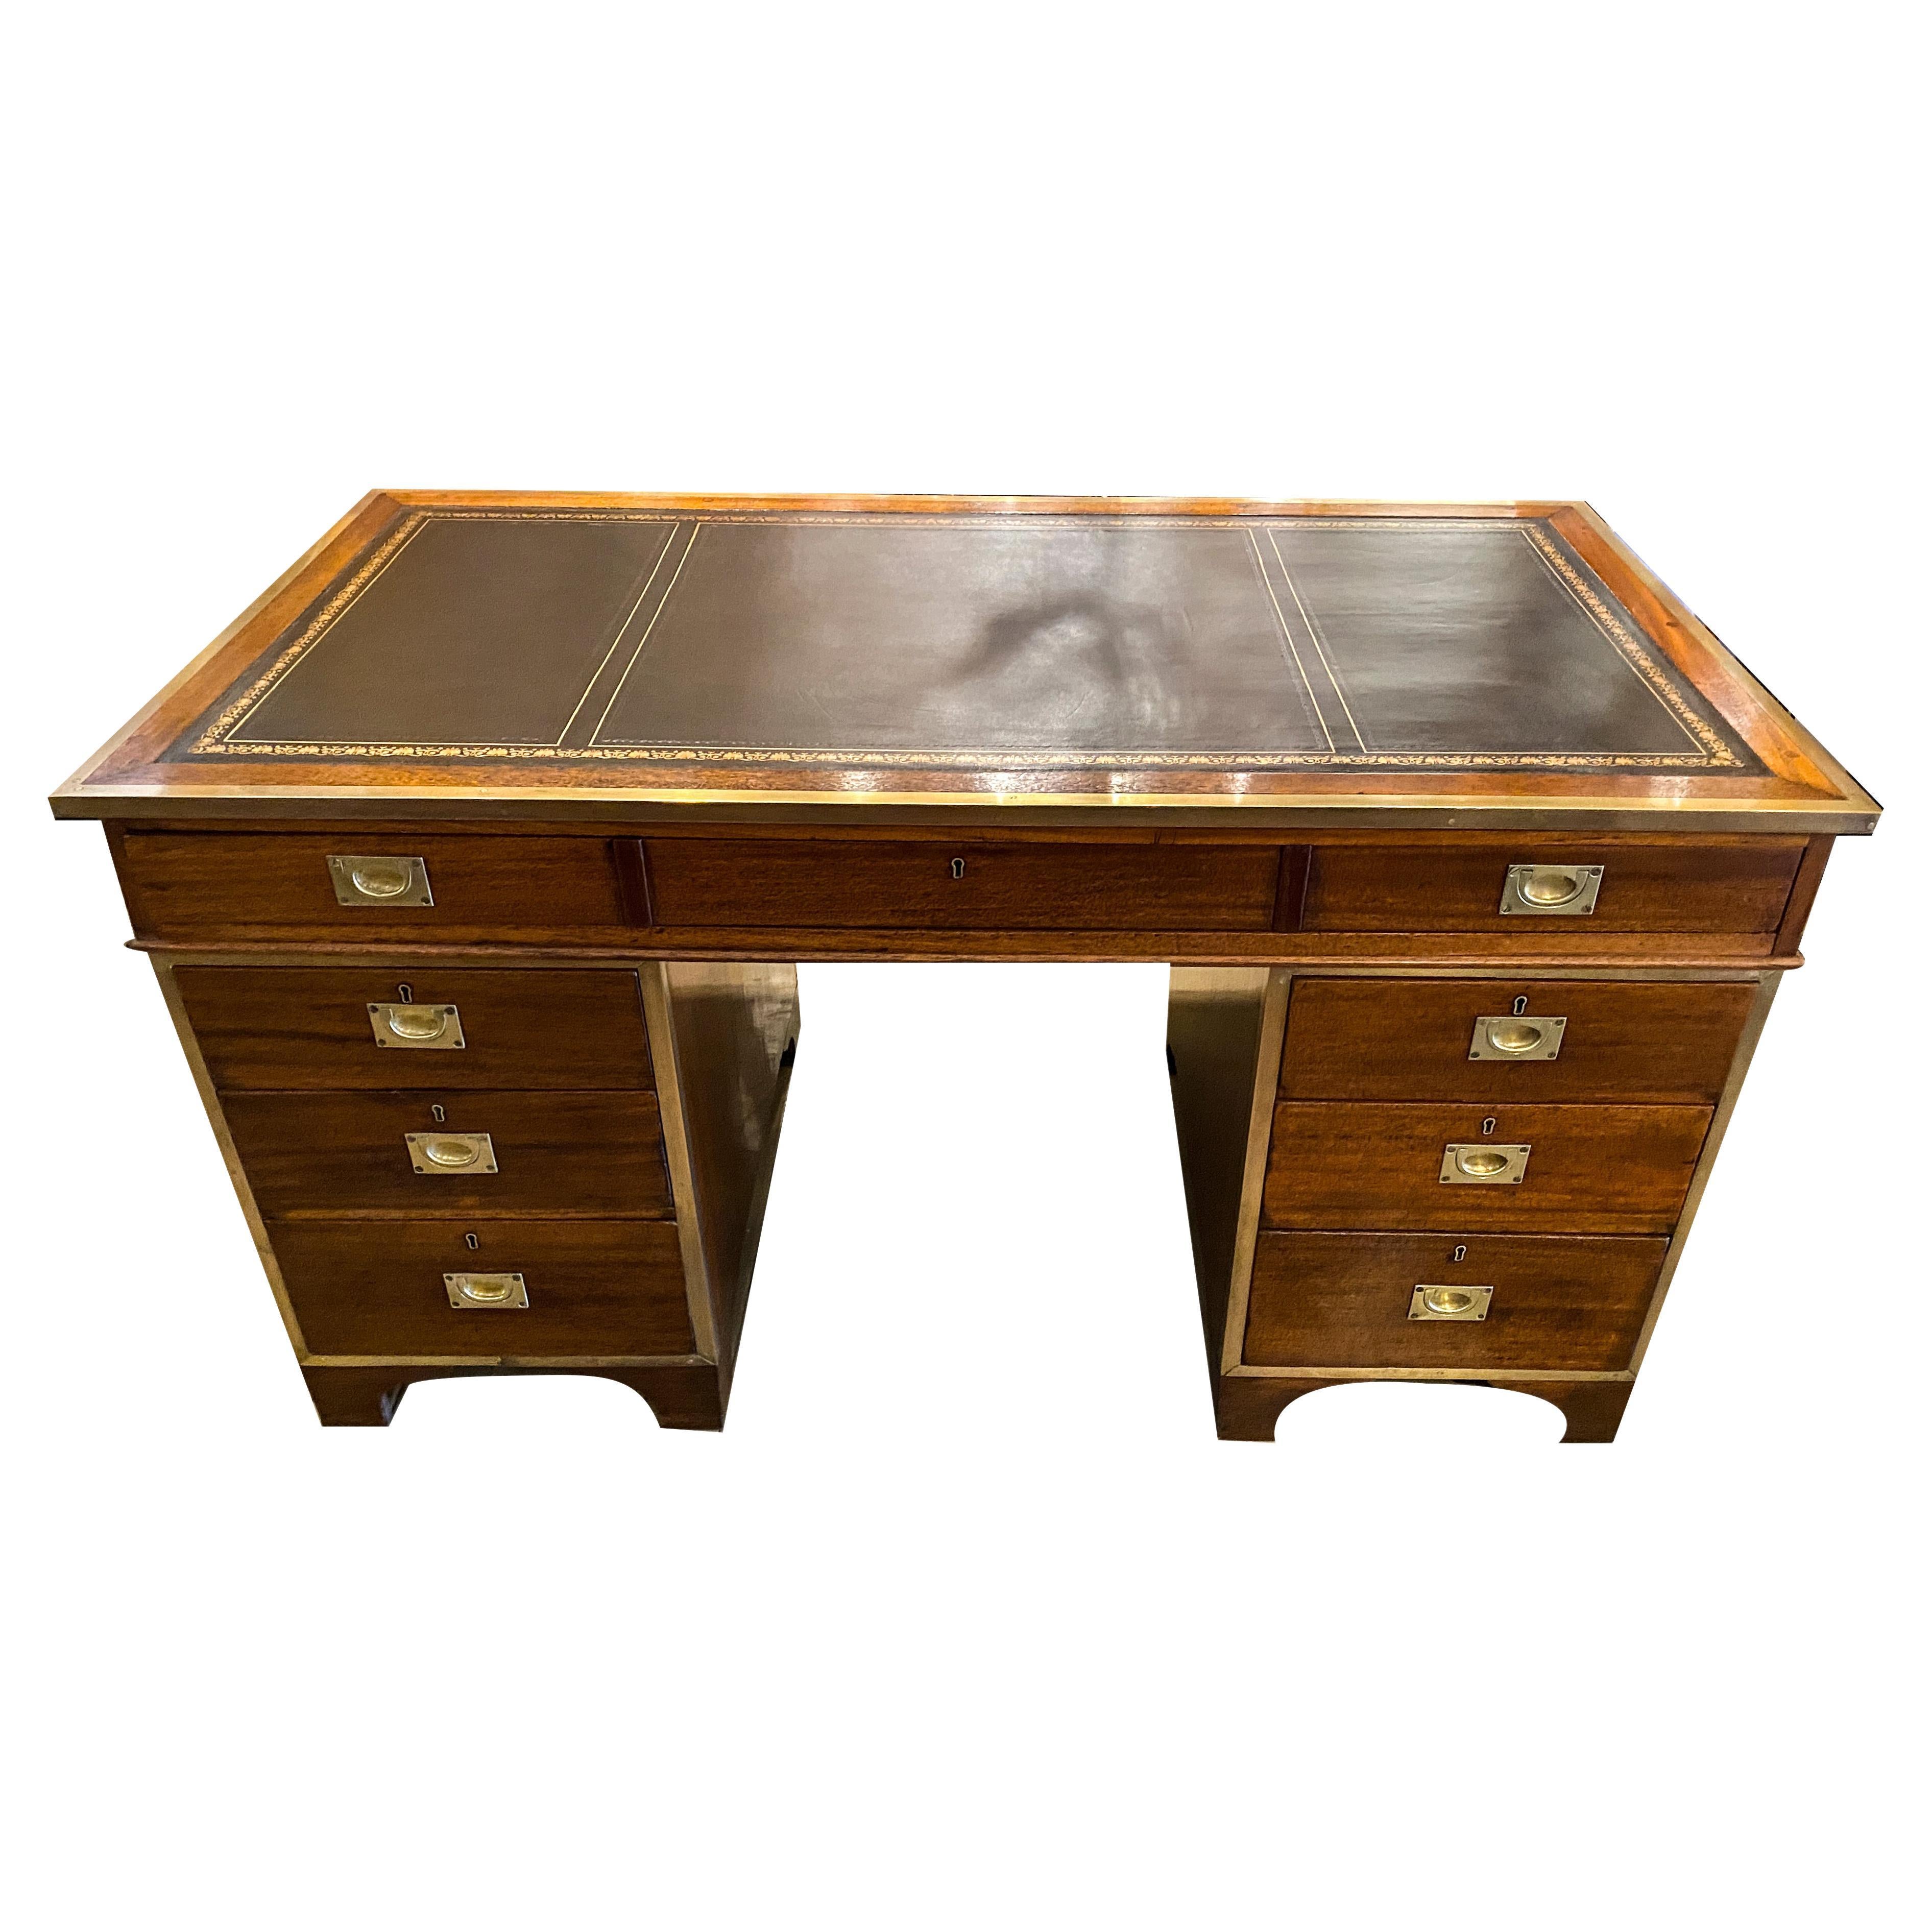 With an inset black leather top within a border over a long drawer, two pedestal base each with three drawers. Bracket feet. All with inset brass handles.